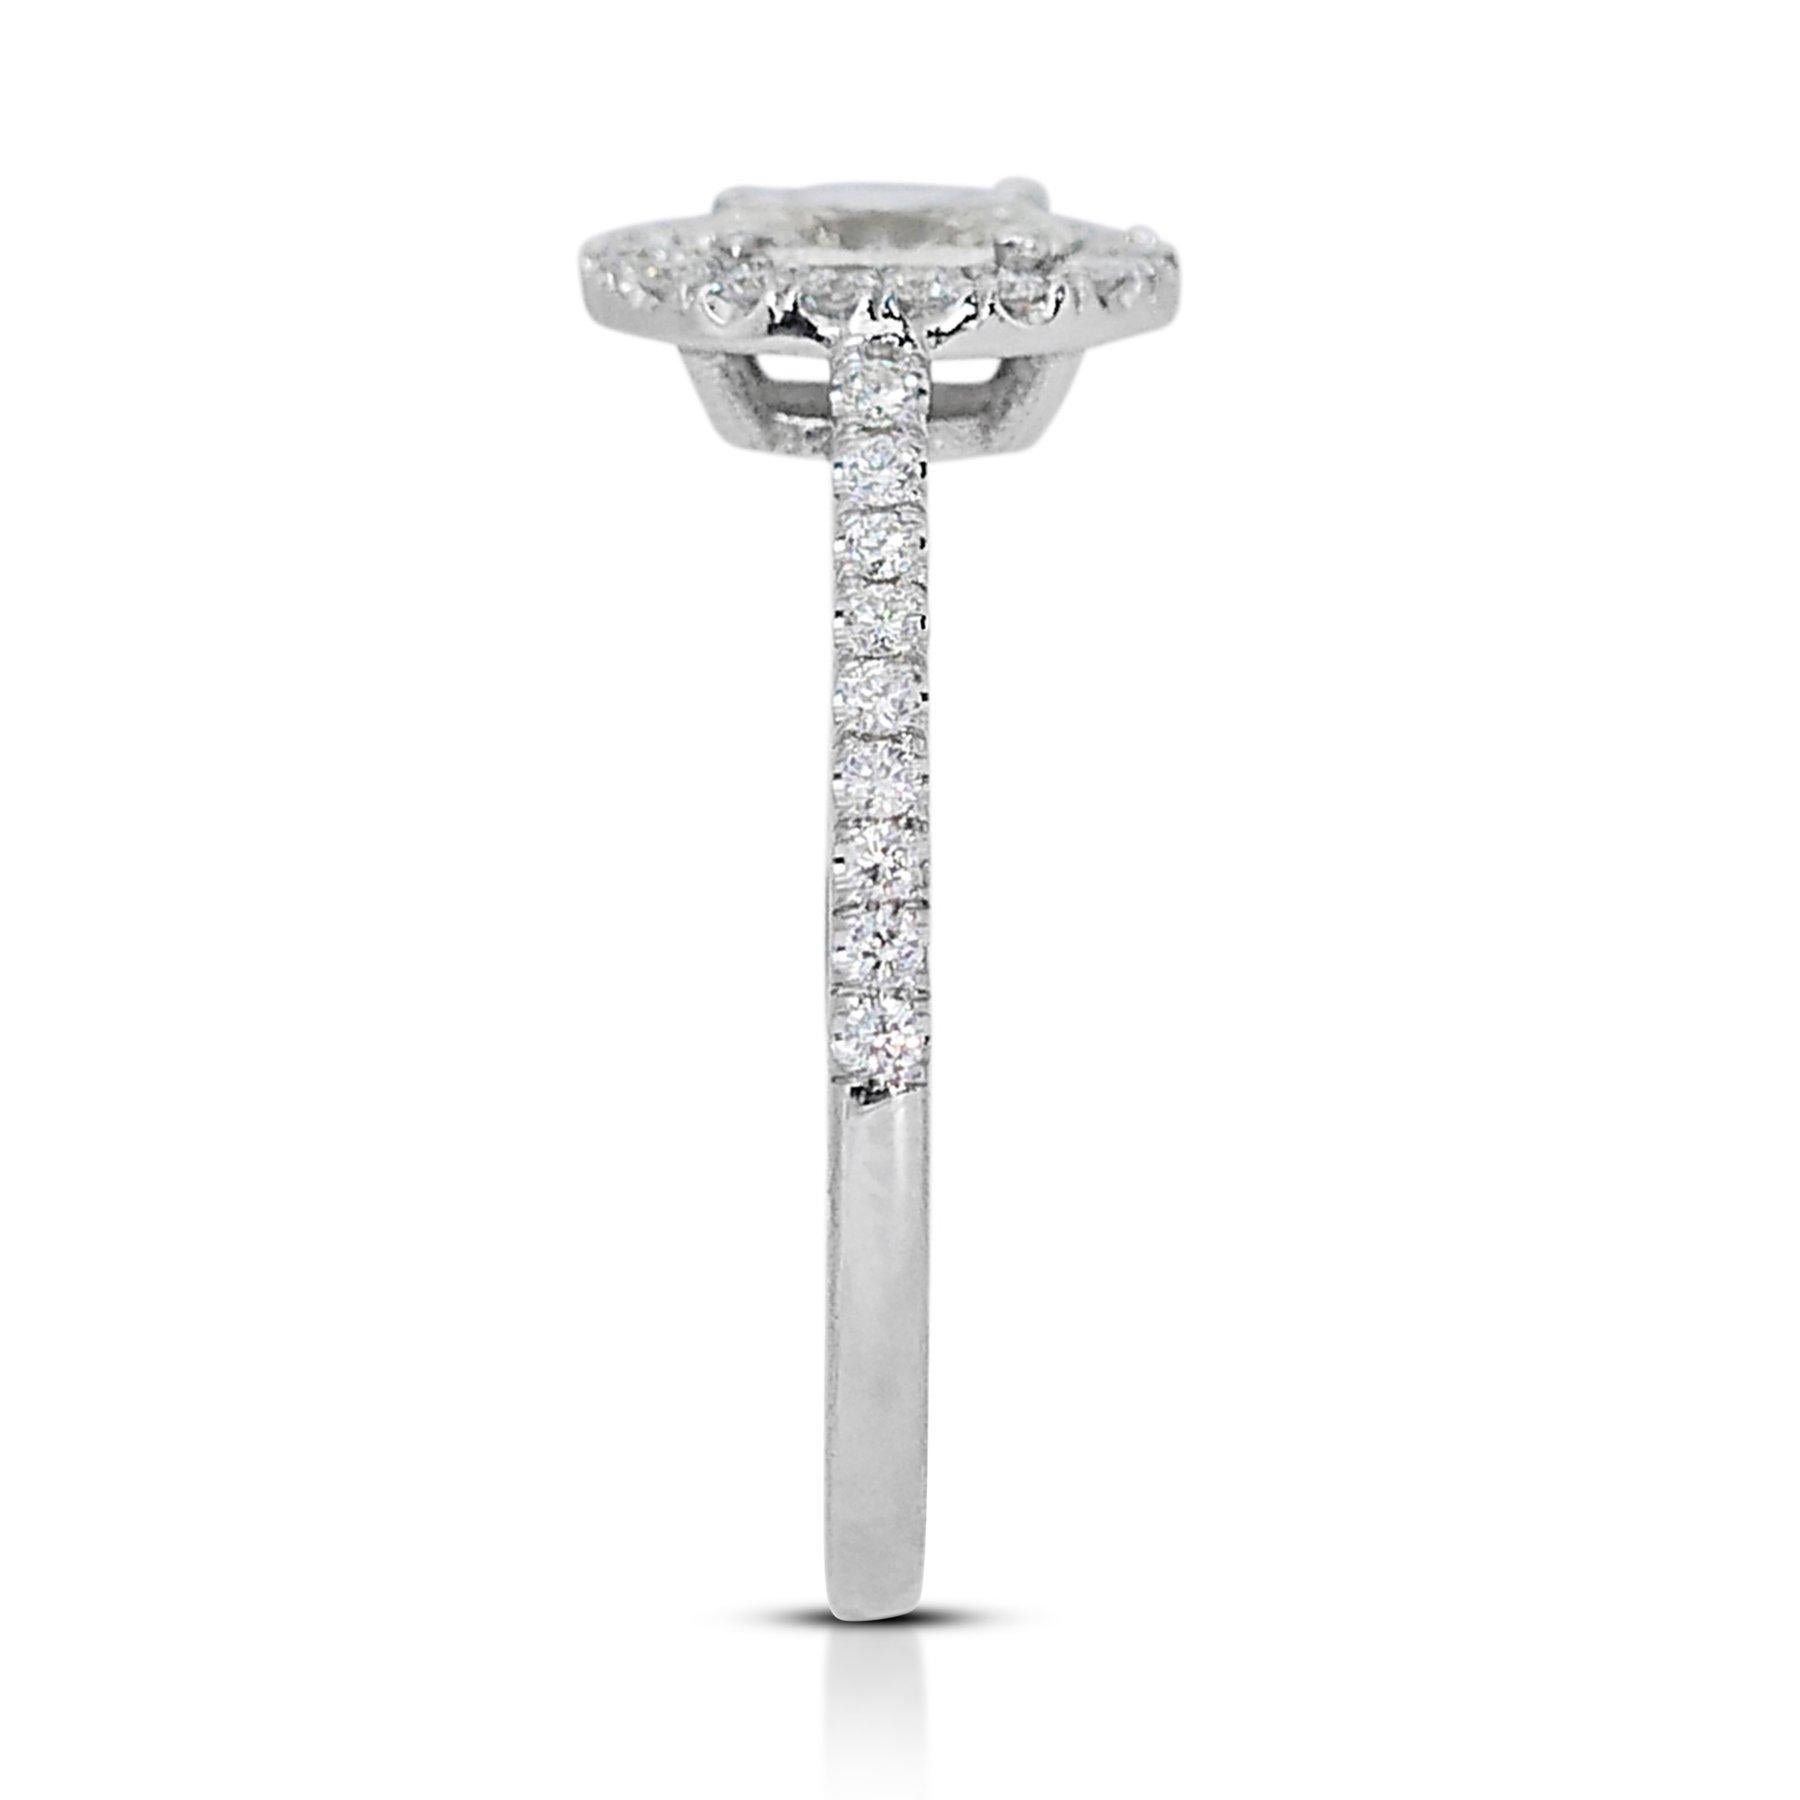 Sparkling 1.00ct Oval Diamond Halo Ring in 18k White Gold - GIA Certified 1